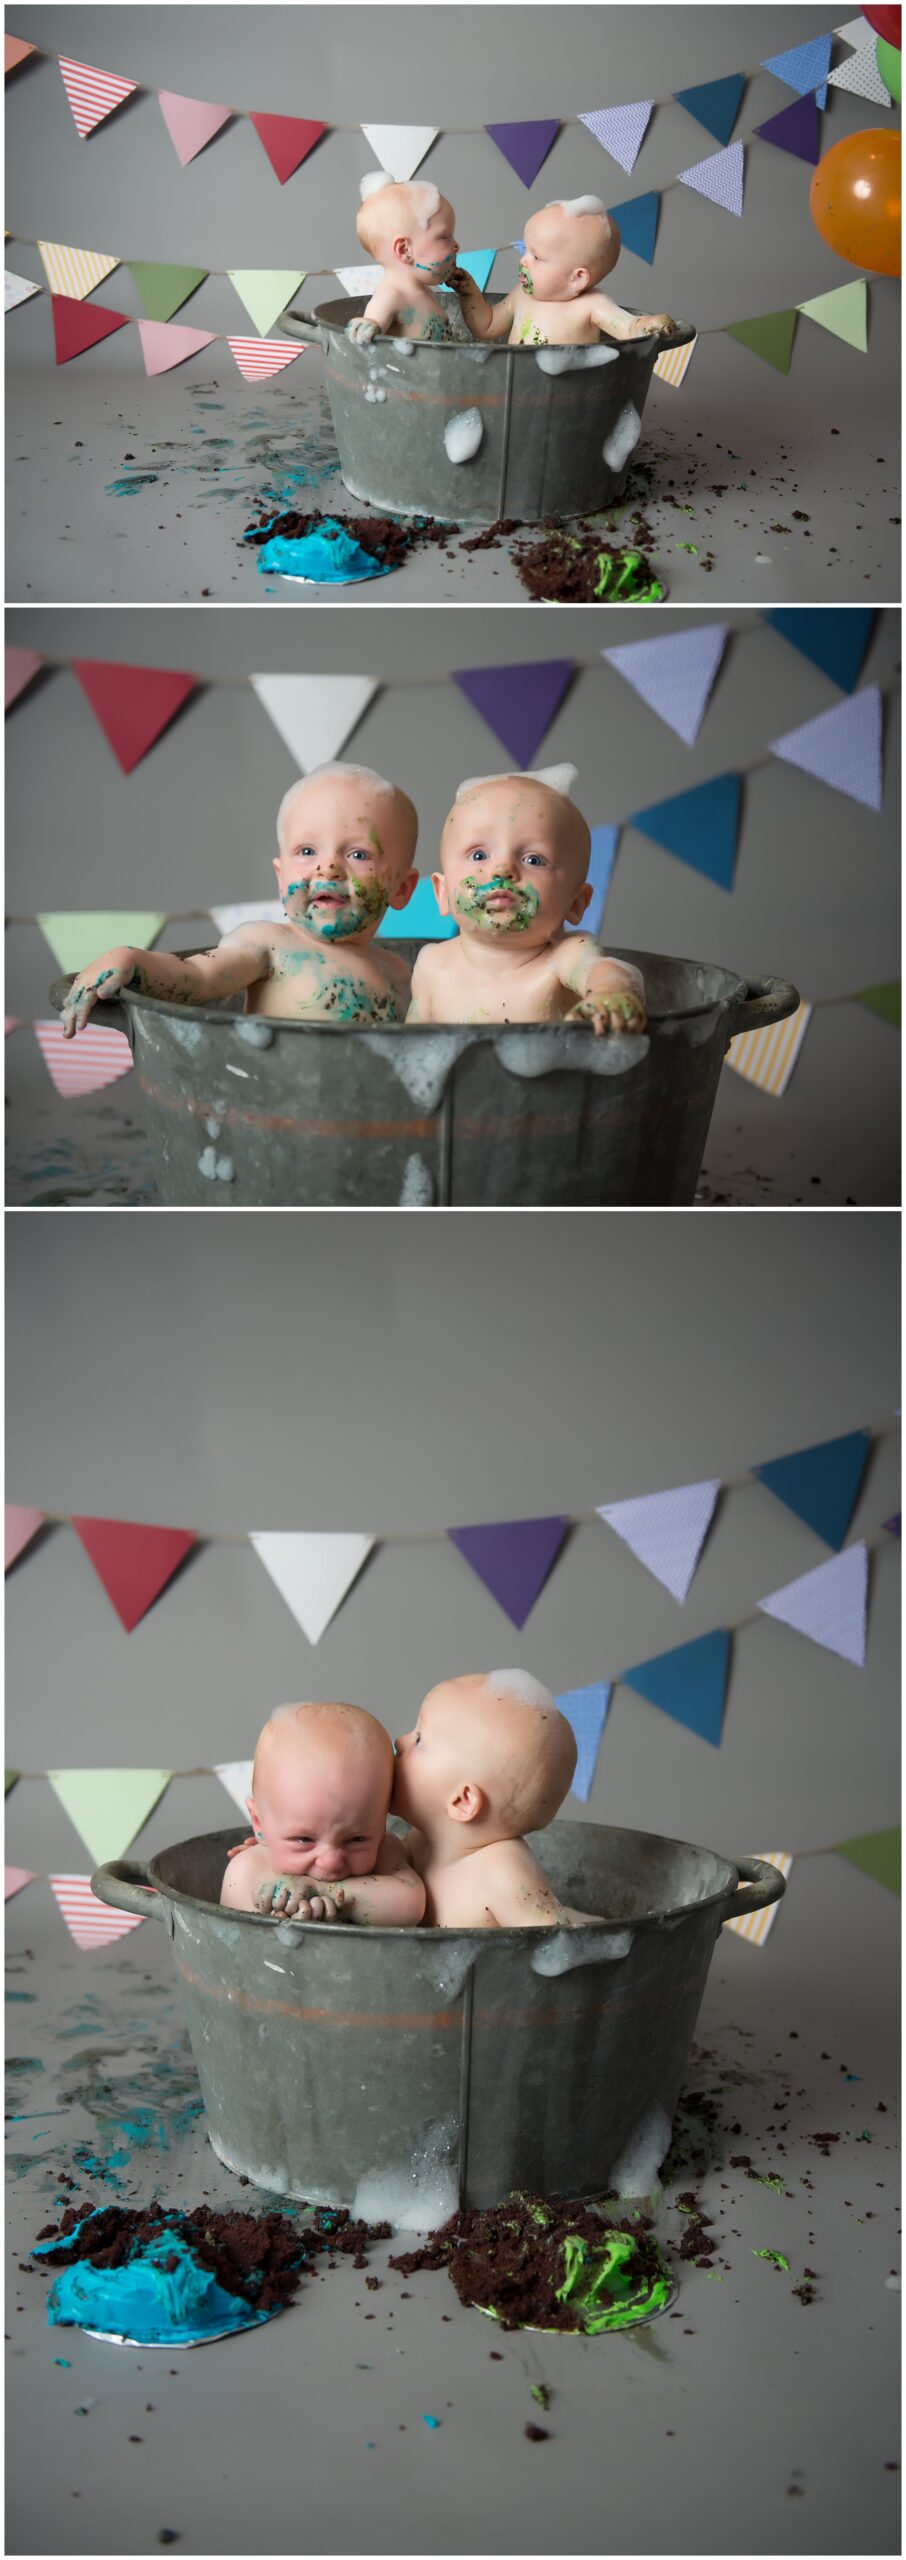 Ottawa Baby Photographer | The Twins are One!